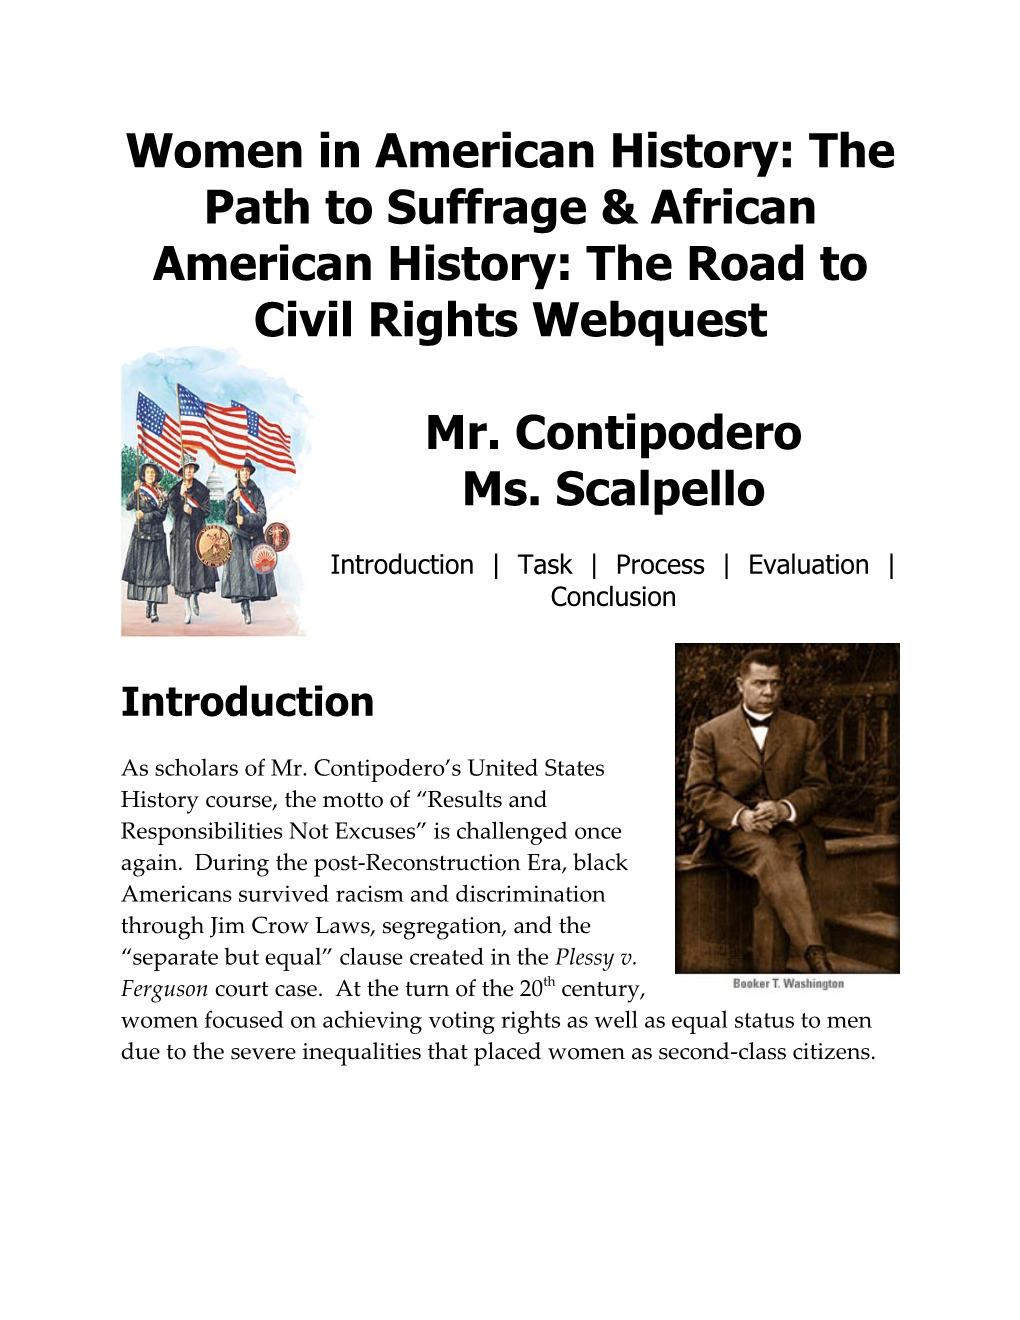 Women in American History: the Path to Suffrage & African American History: the Road To